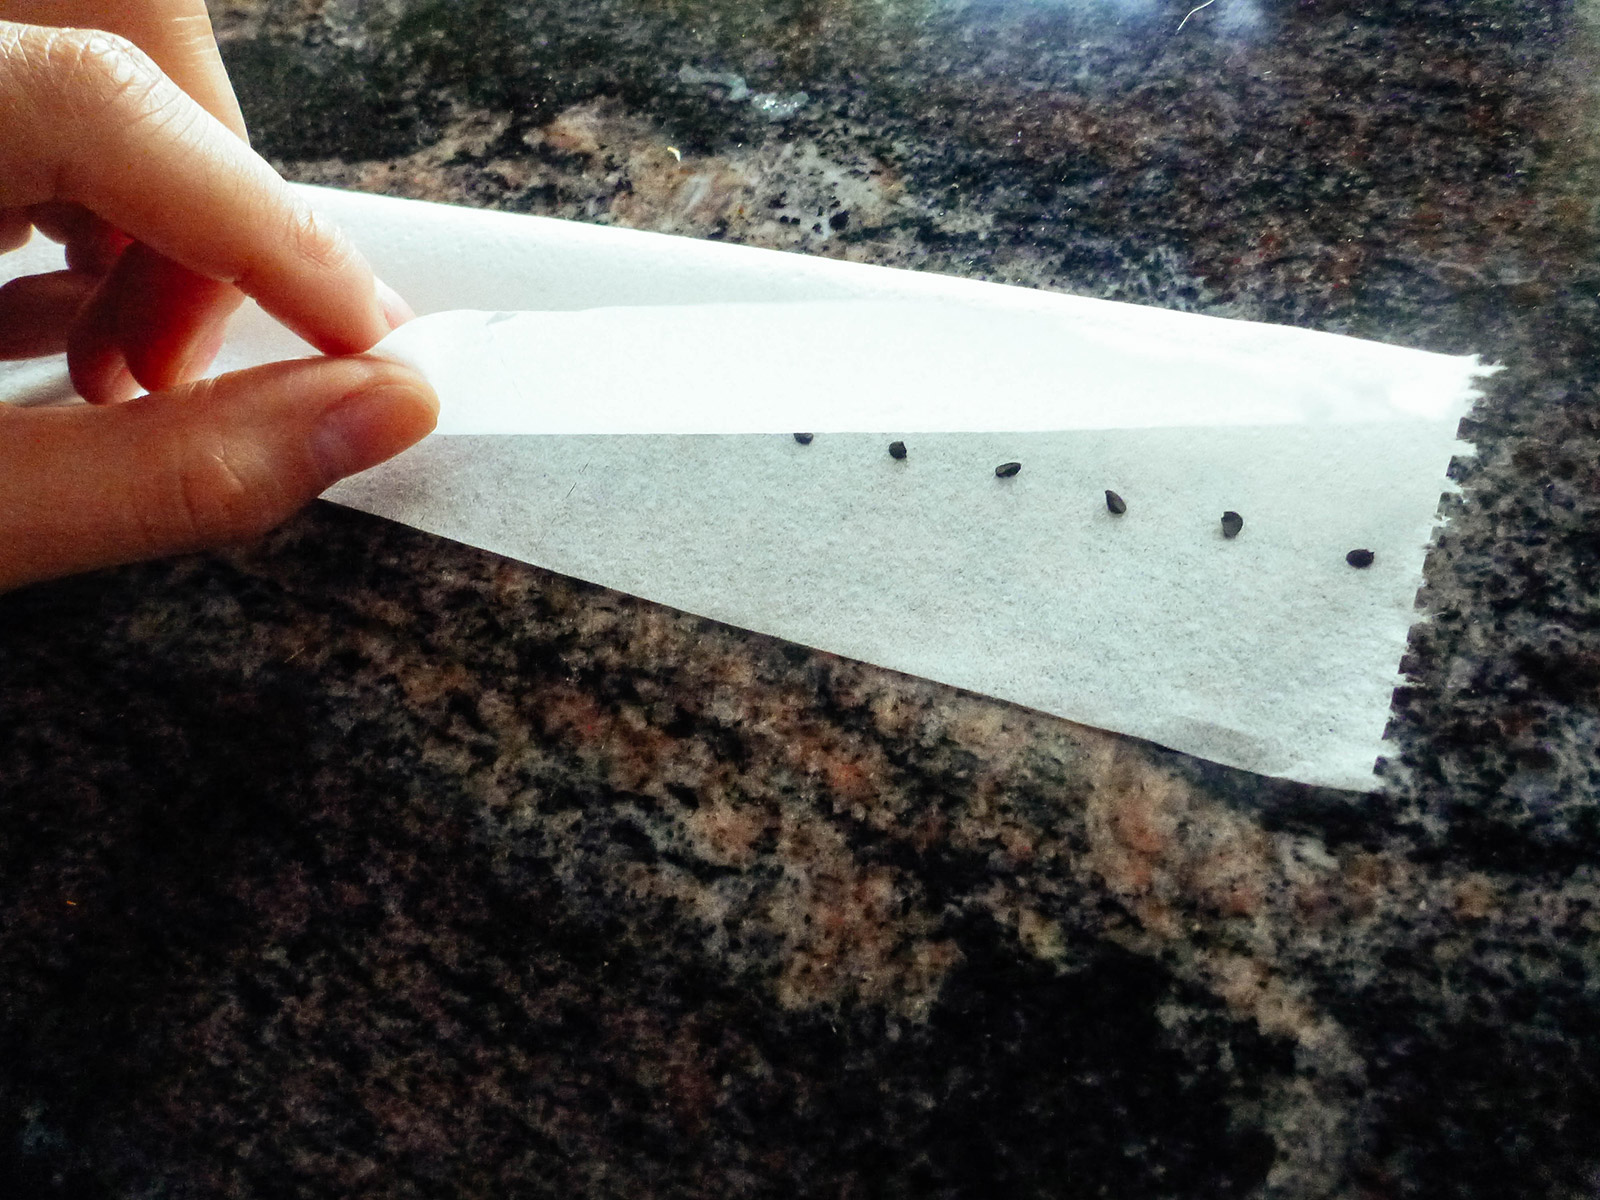 Top half of a strip of toilet paper being folded over a row of glued-on seeds